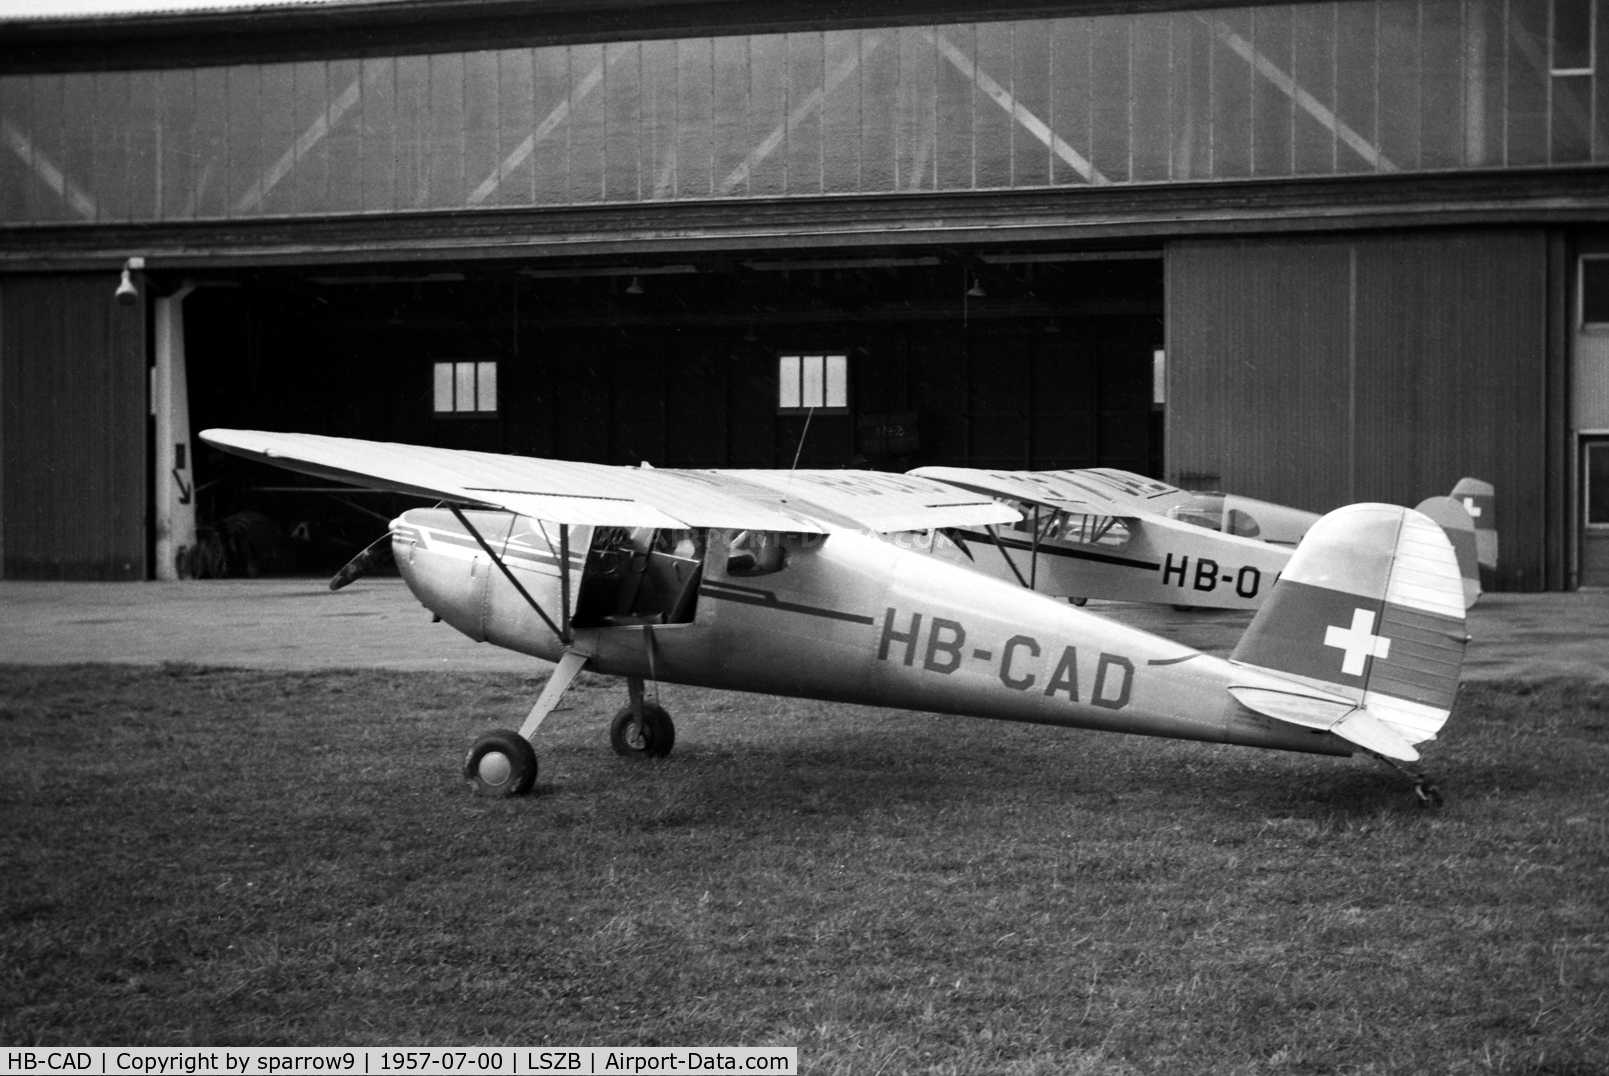 HB-CAD, 1947 Cessna 140 C/N 13033, Taken at Berne airport in the mid-fifties. Scanned from a 6x9 negative.